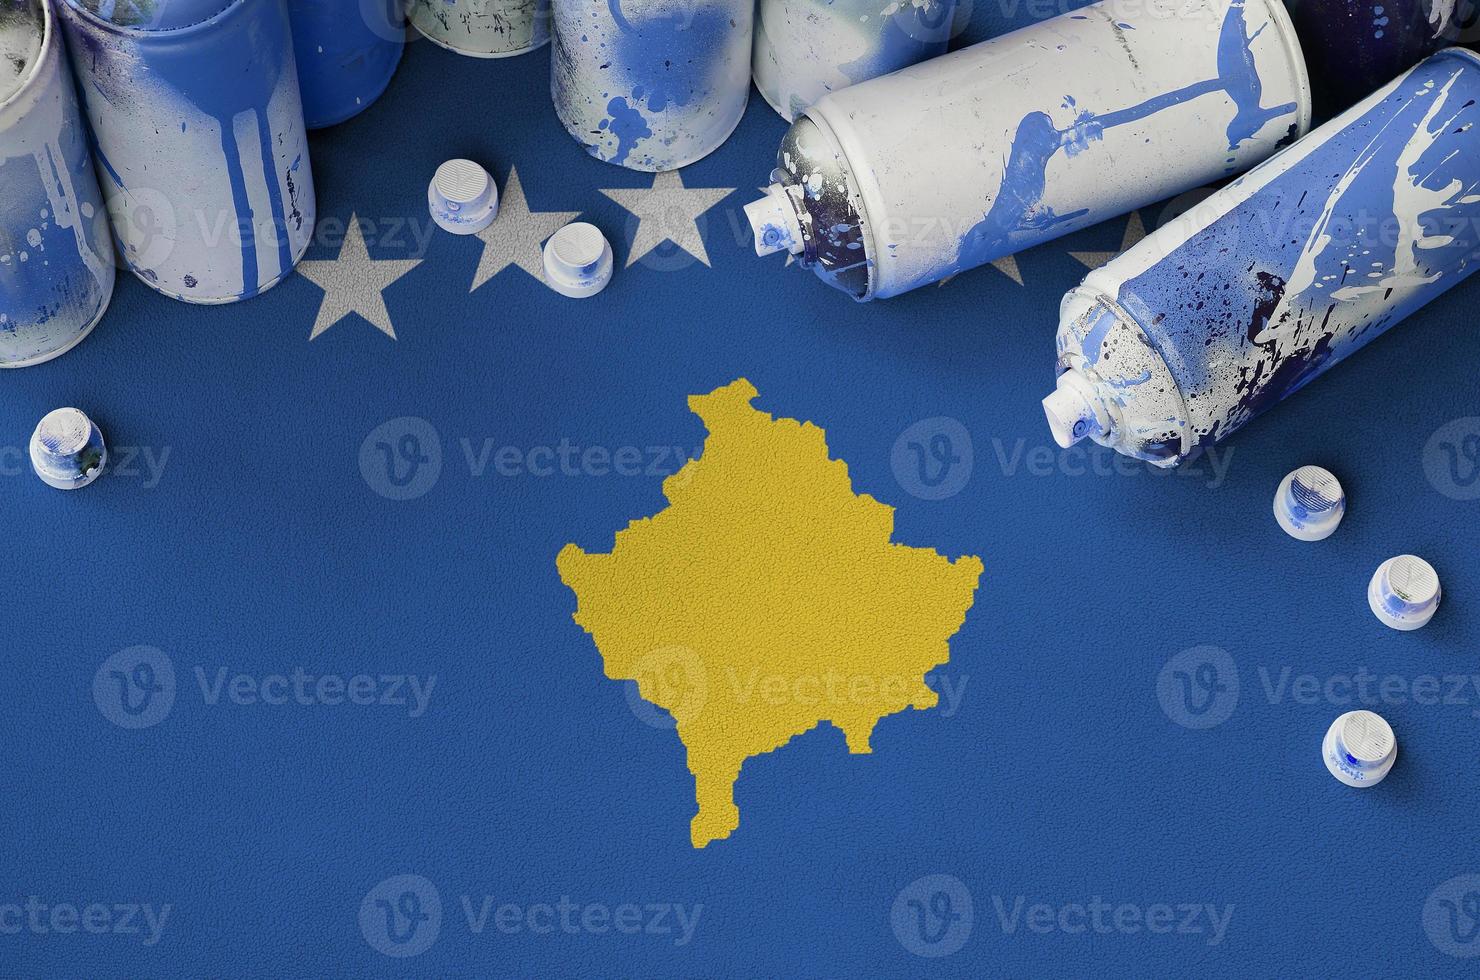 Kosovo flag and few used aerosol spray cans for graffiti painting. Street art culture concept photo